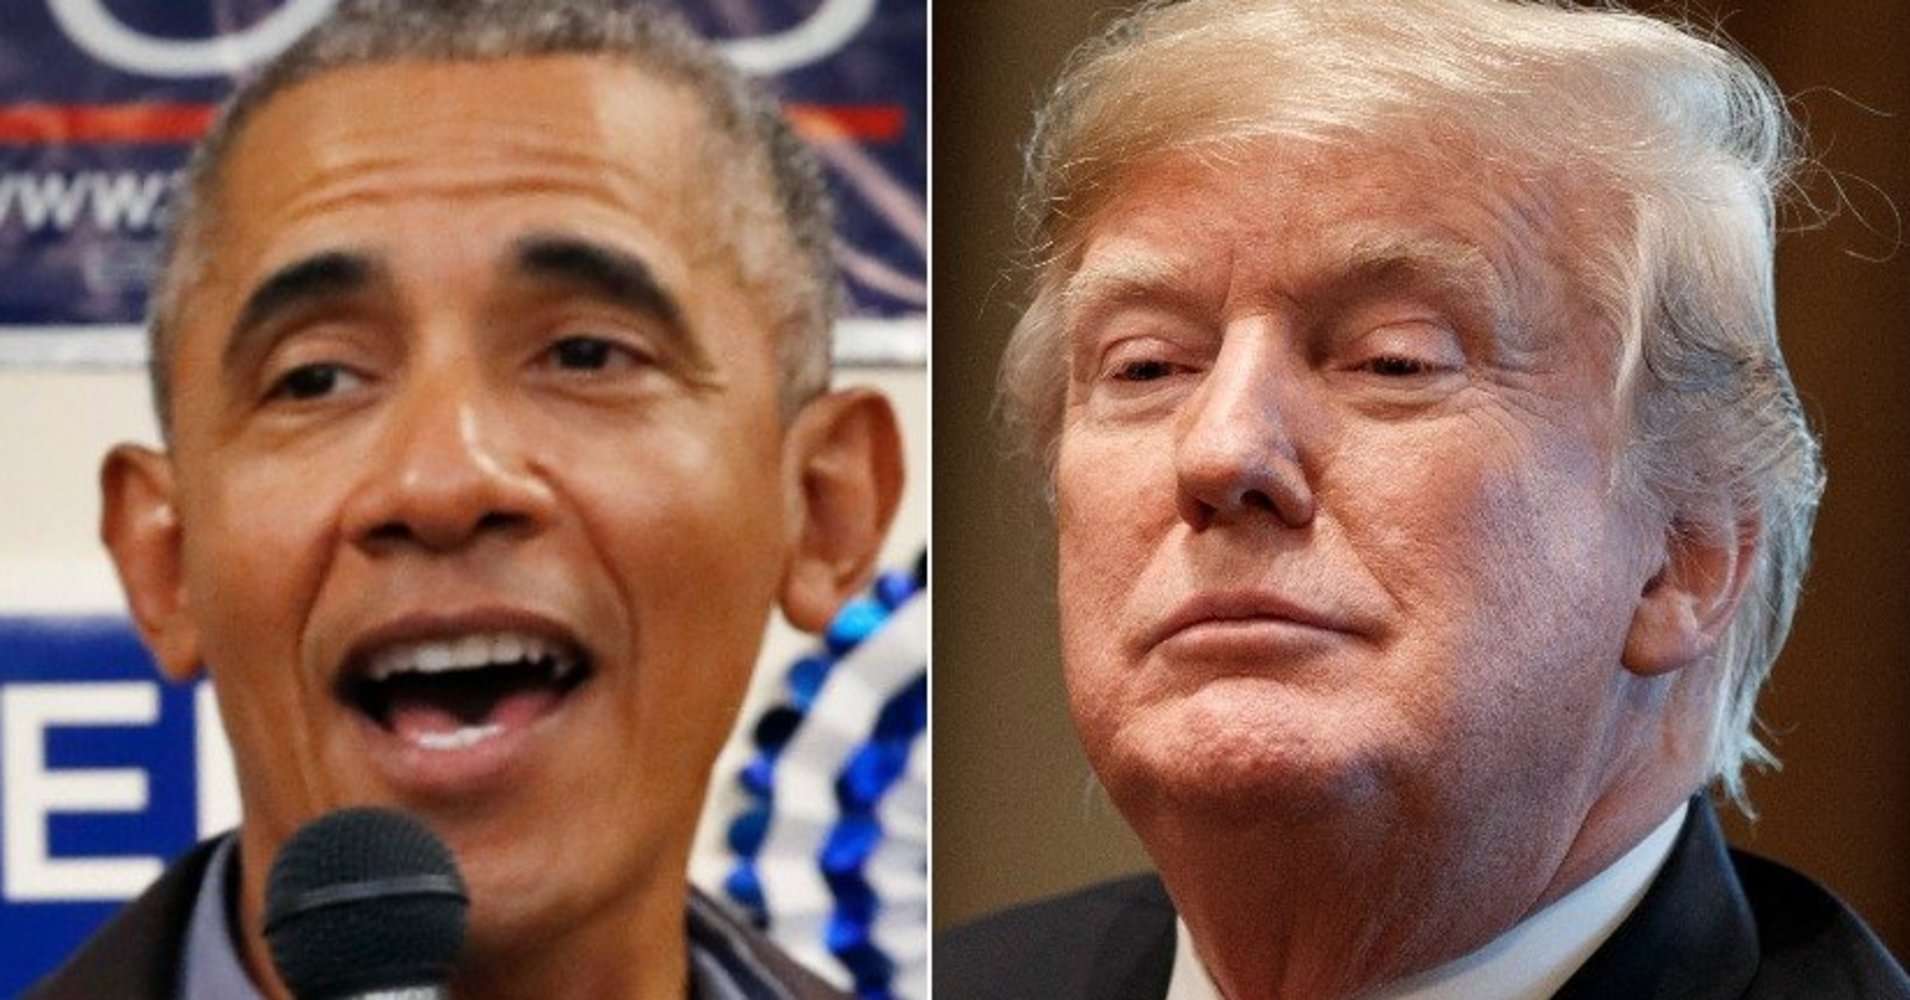 image for Stunning Supercut Video Exposes The Fox News Double Standard On Trump And Obama